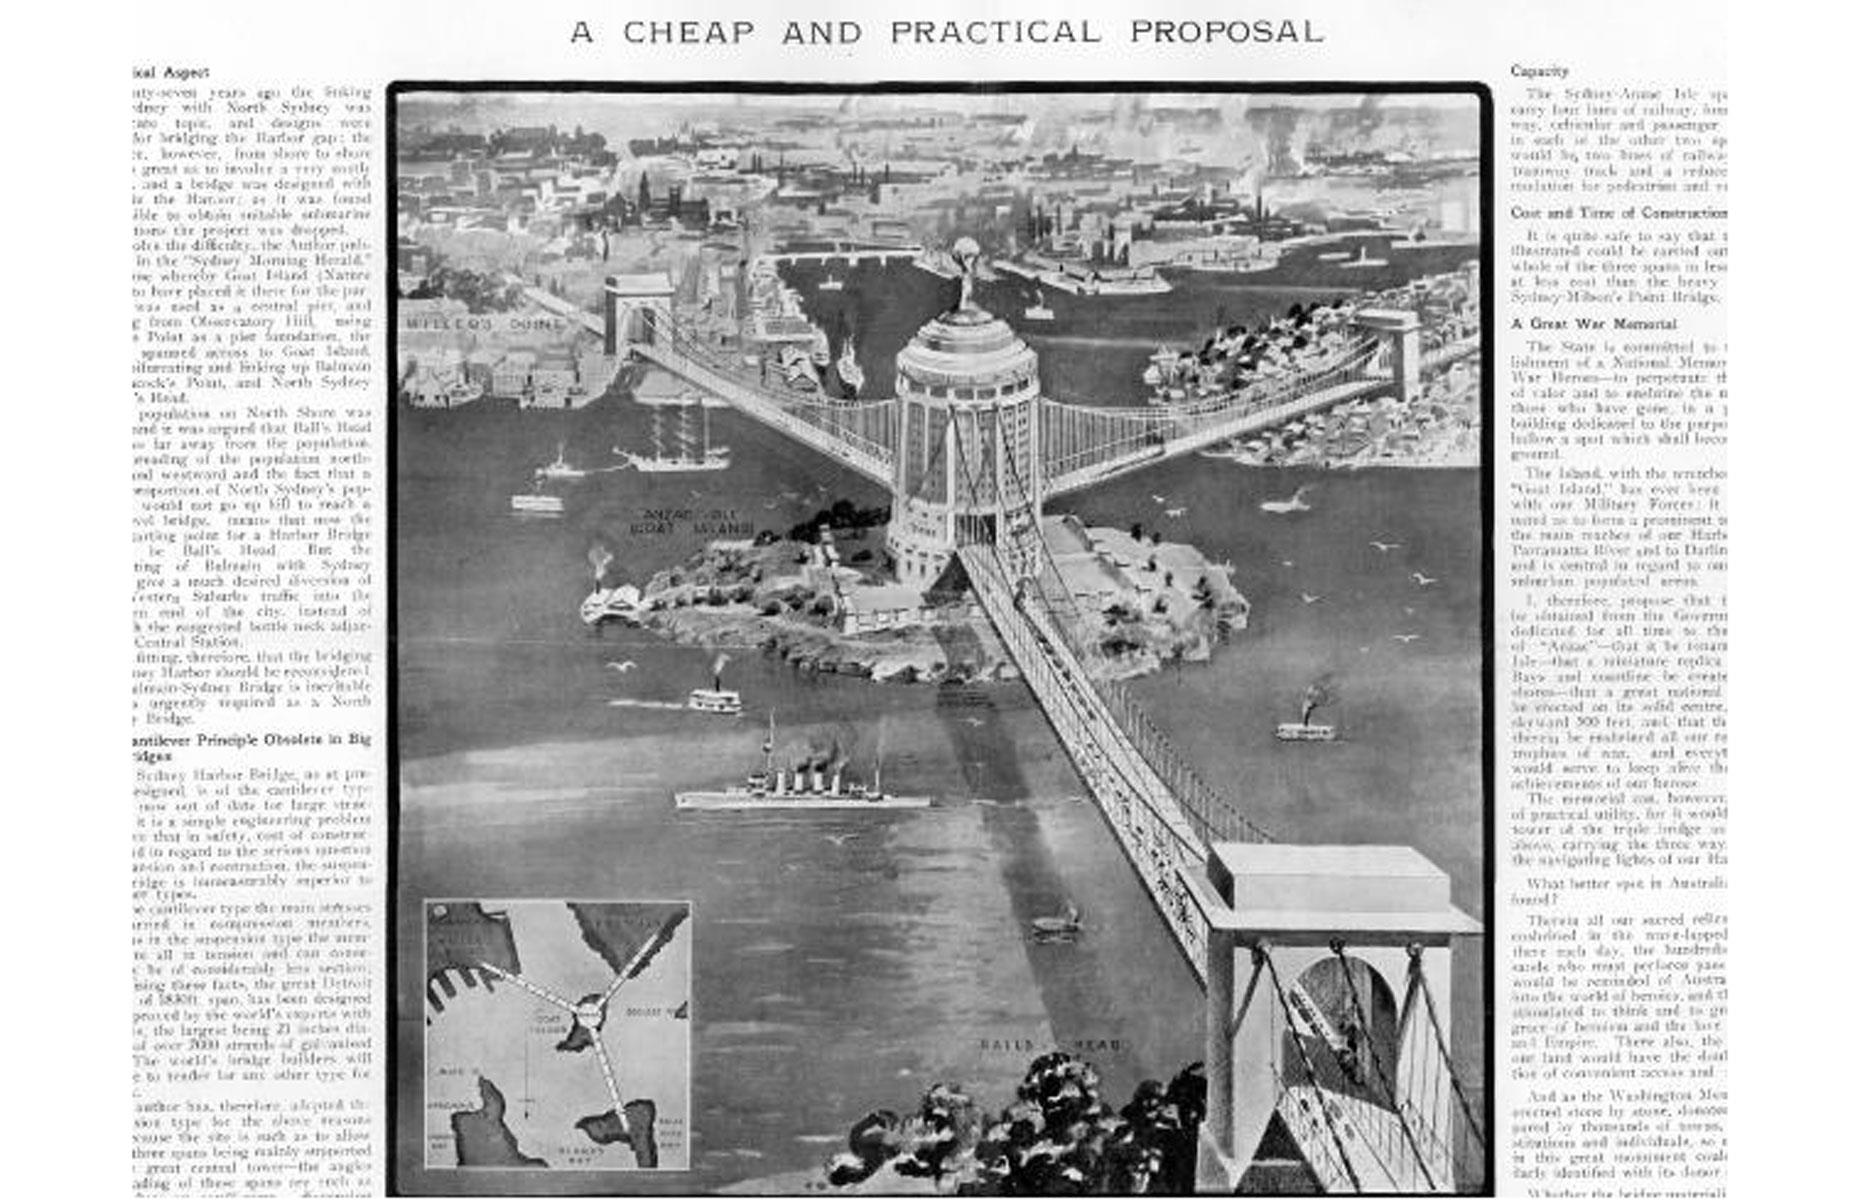 Plans to build a bridge in the harbor had been floated as early as 1815, and plenty of designs had been proposed over the years before Dorman Long's structure won the day. Among the most interesting is this striking multi-way bridge, which was submitted for consideration in 1922 by architect Ernest Stowe.